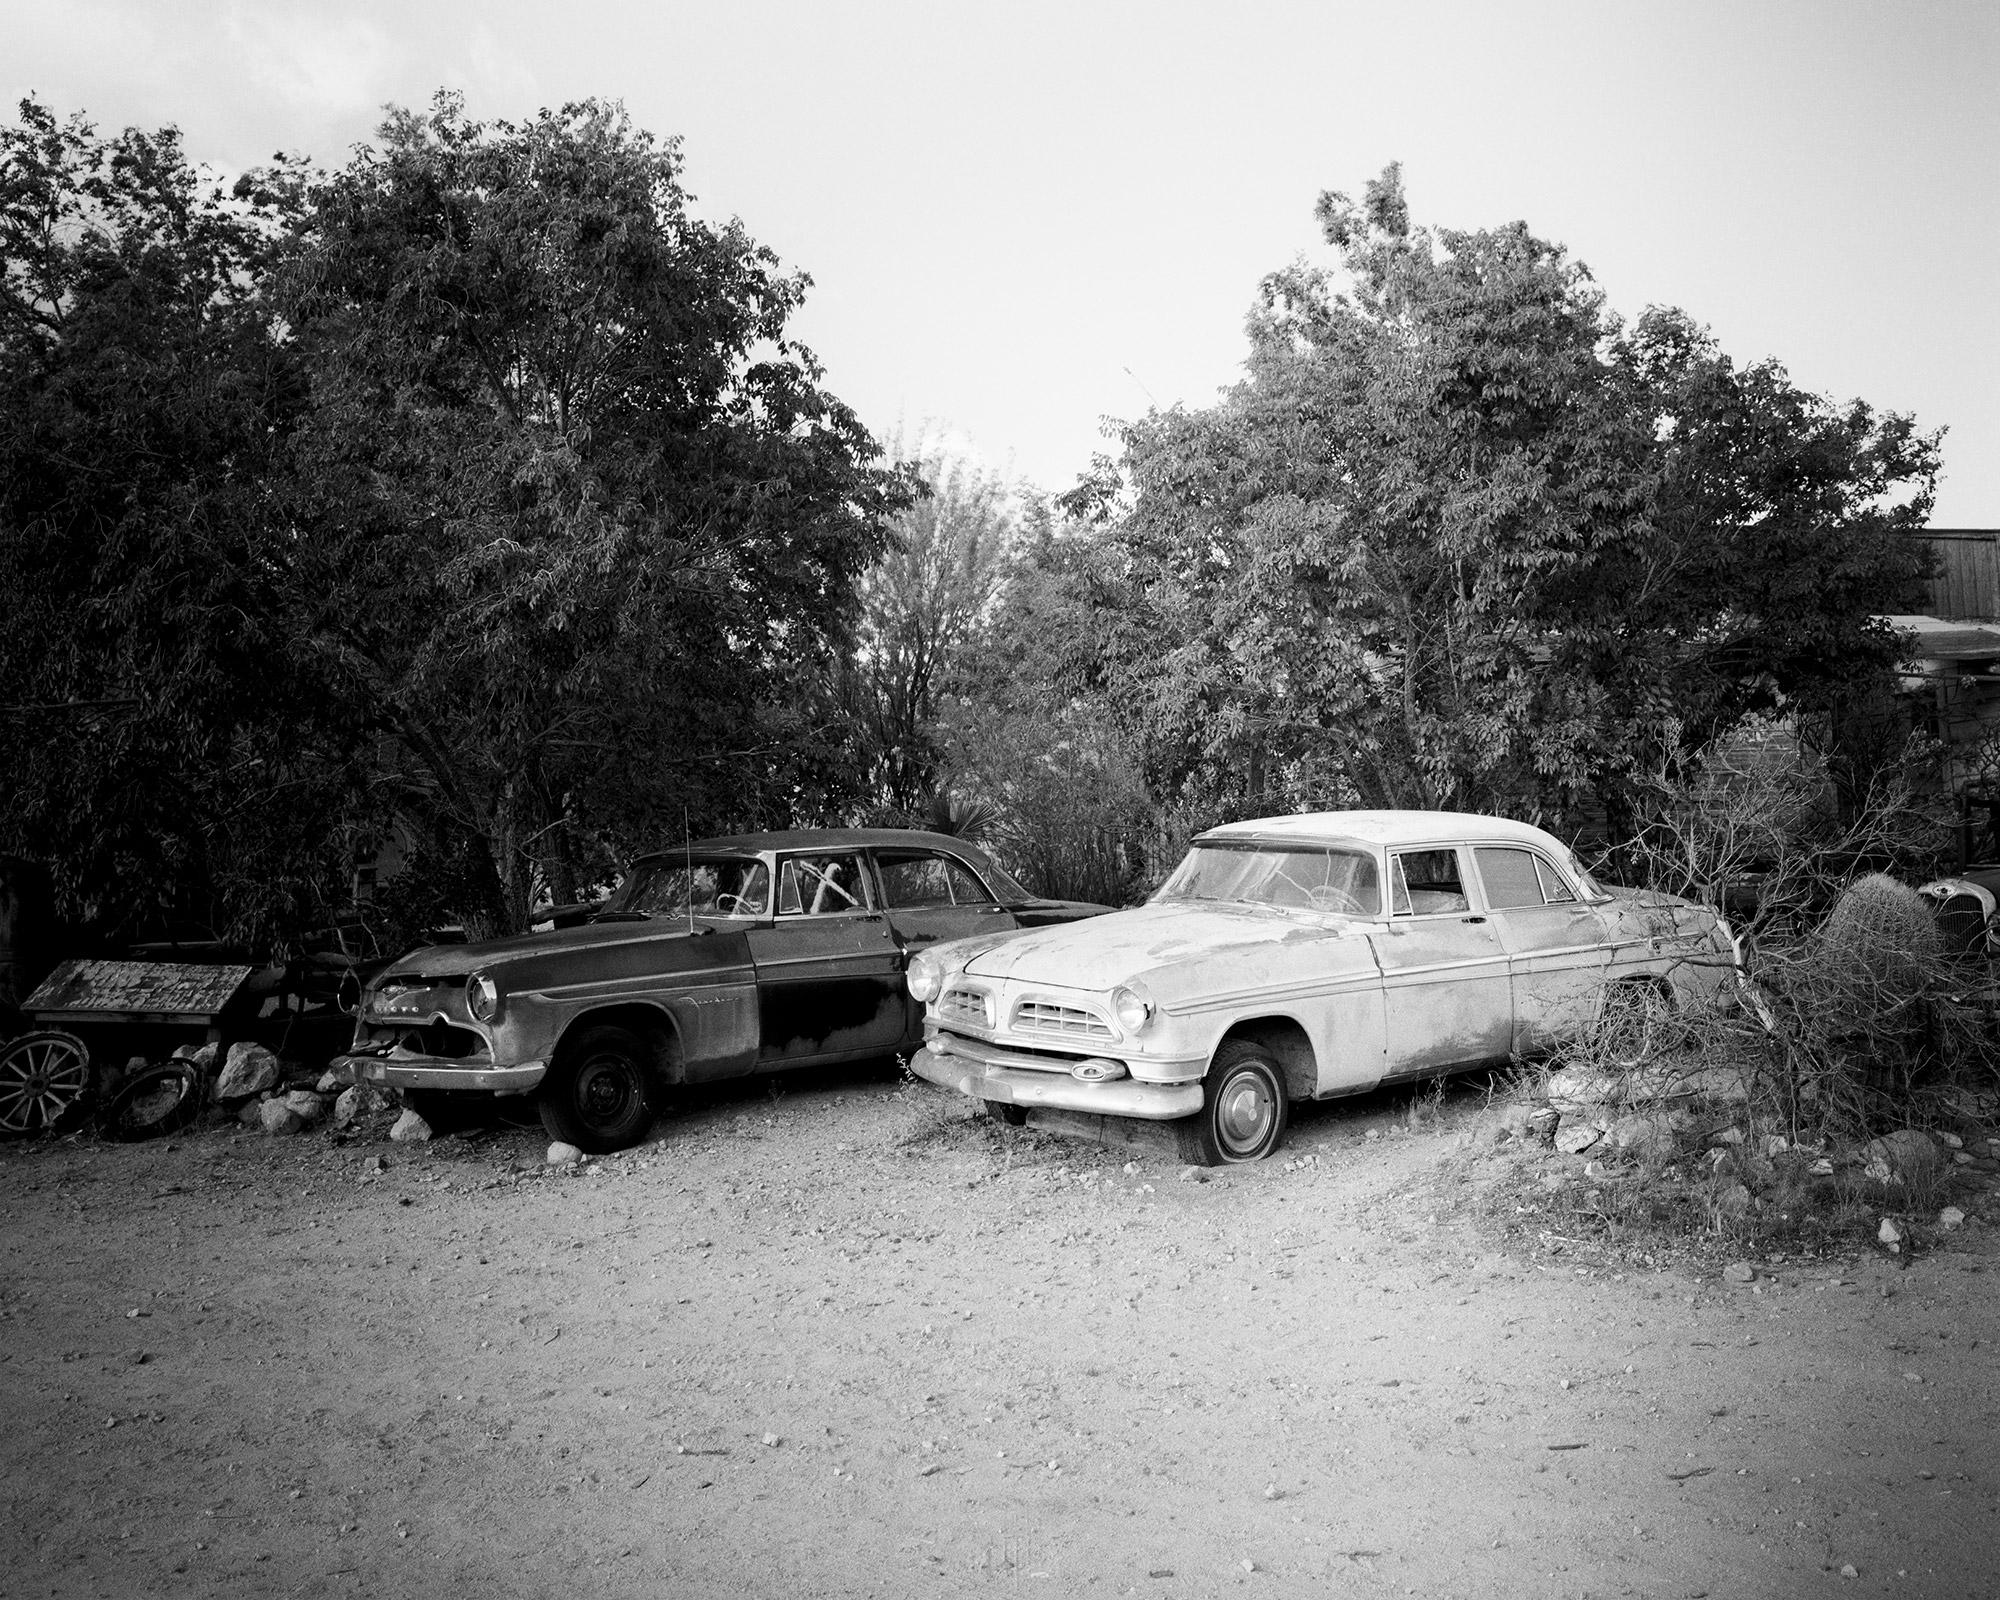 Gerald Berghammer Black and White Photograph - Abandoned Cars, junkyard, California, USA, black and white landscape photography